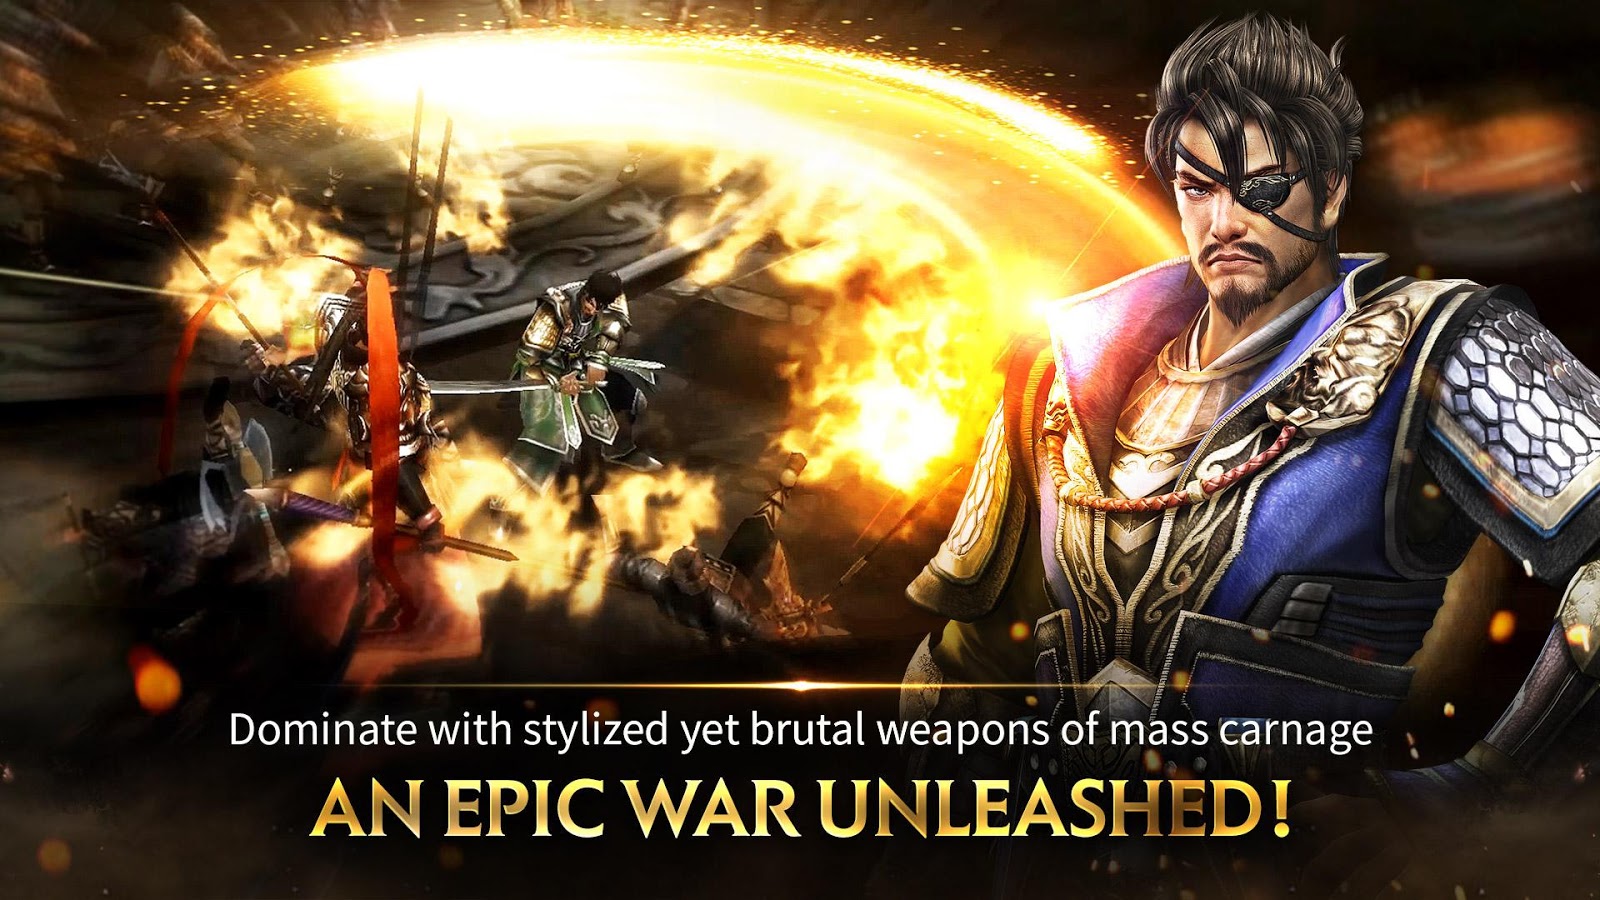 Free Dynasty Warriors Game Dynasty Warriors Unleashed On Mobile Devices Mxdwn Games